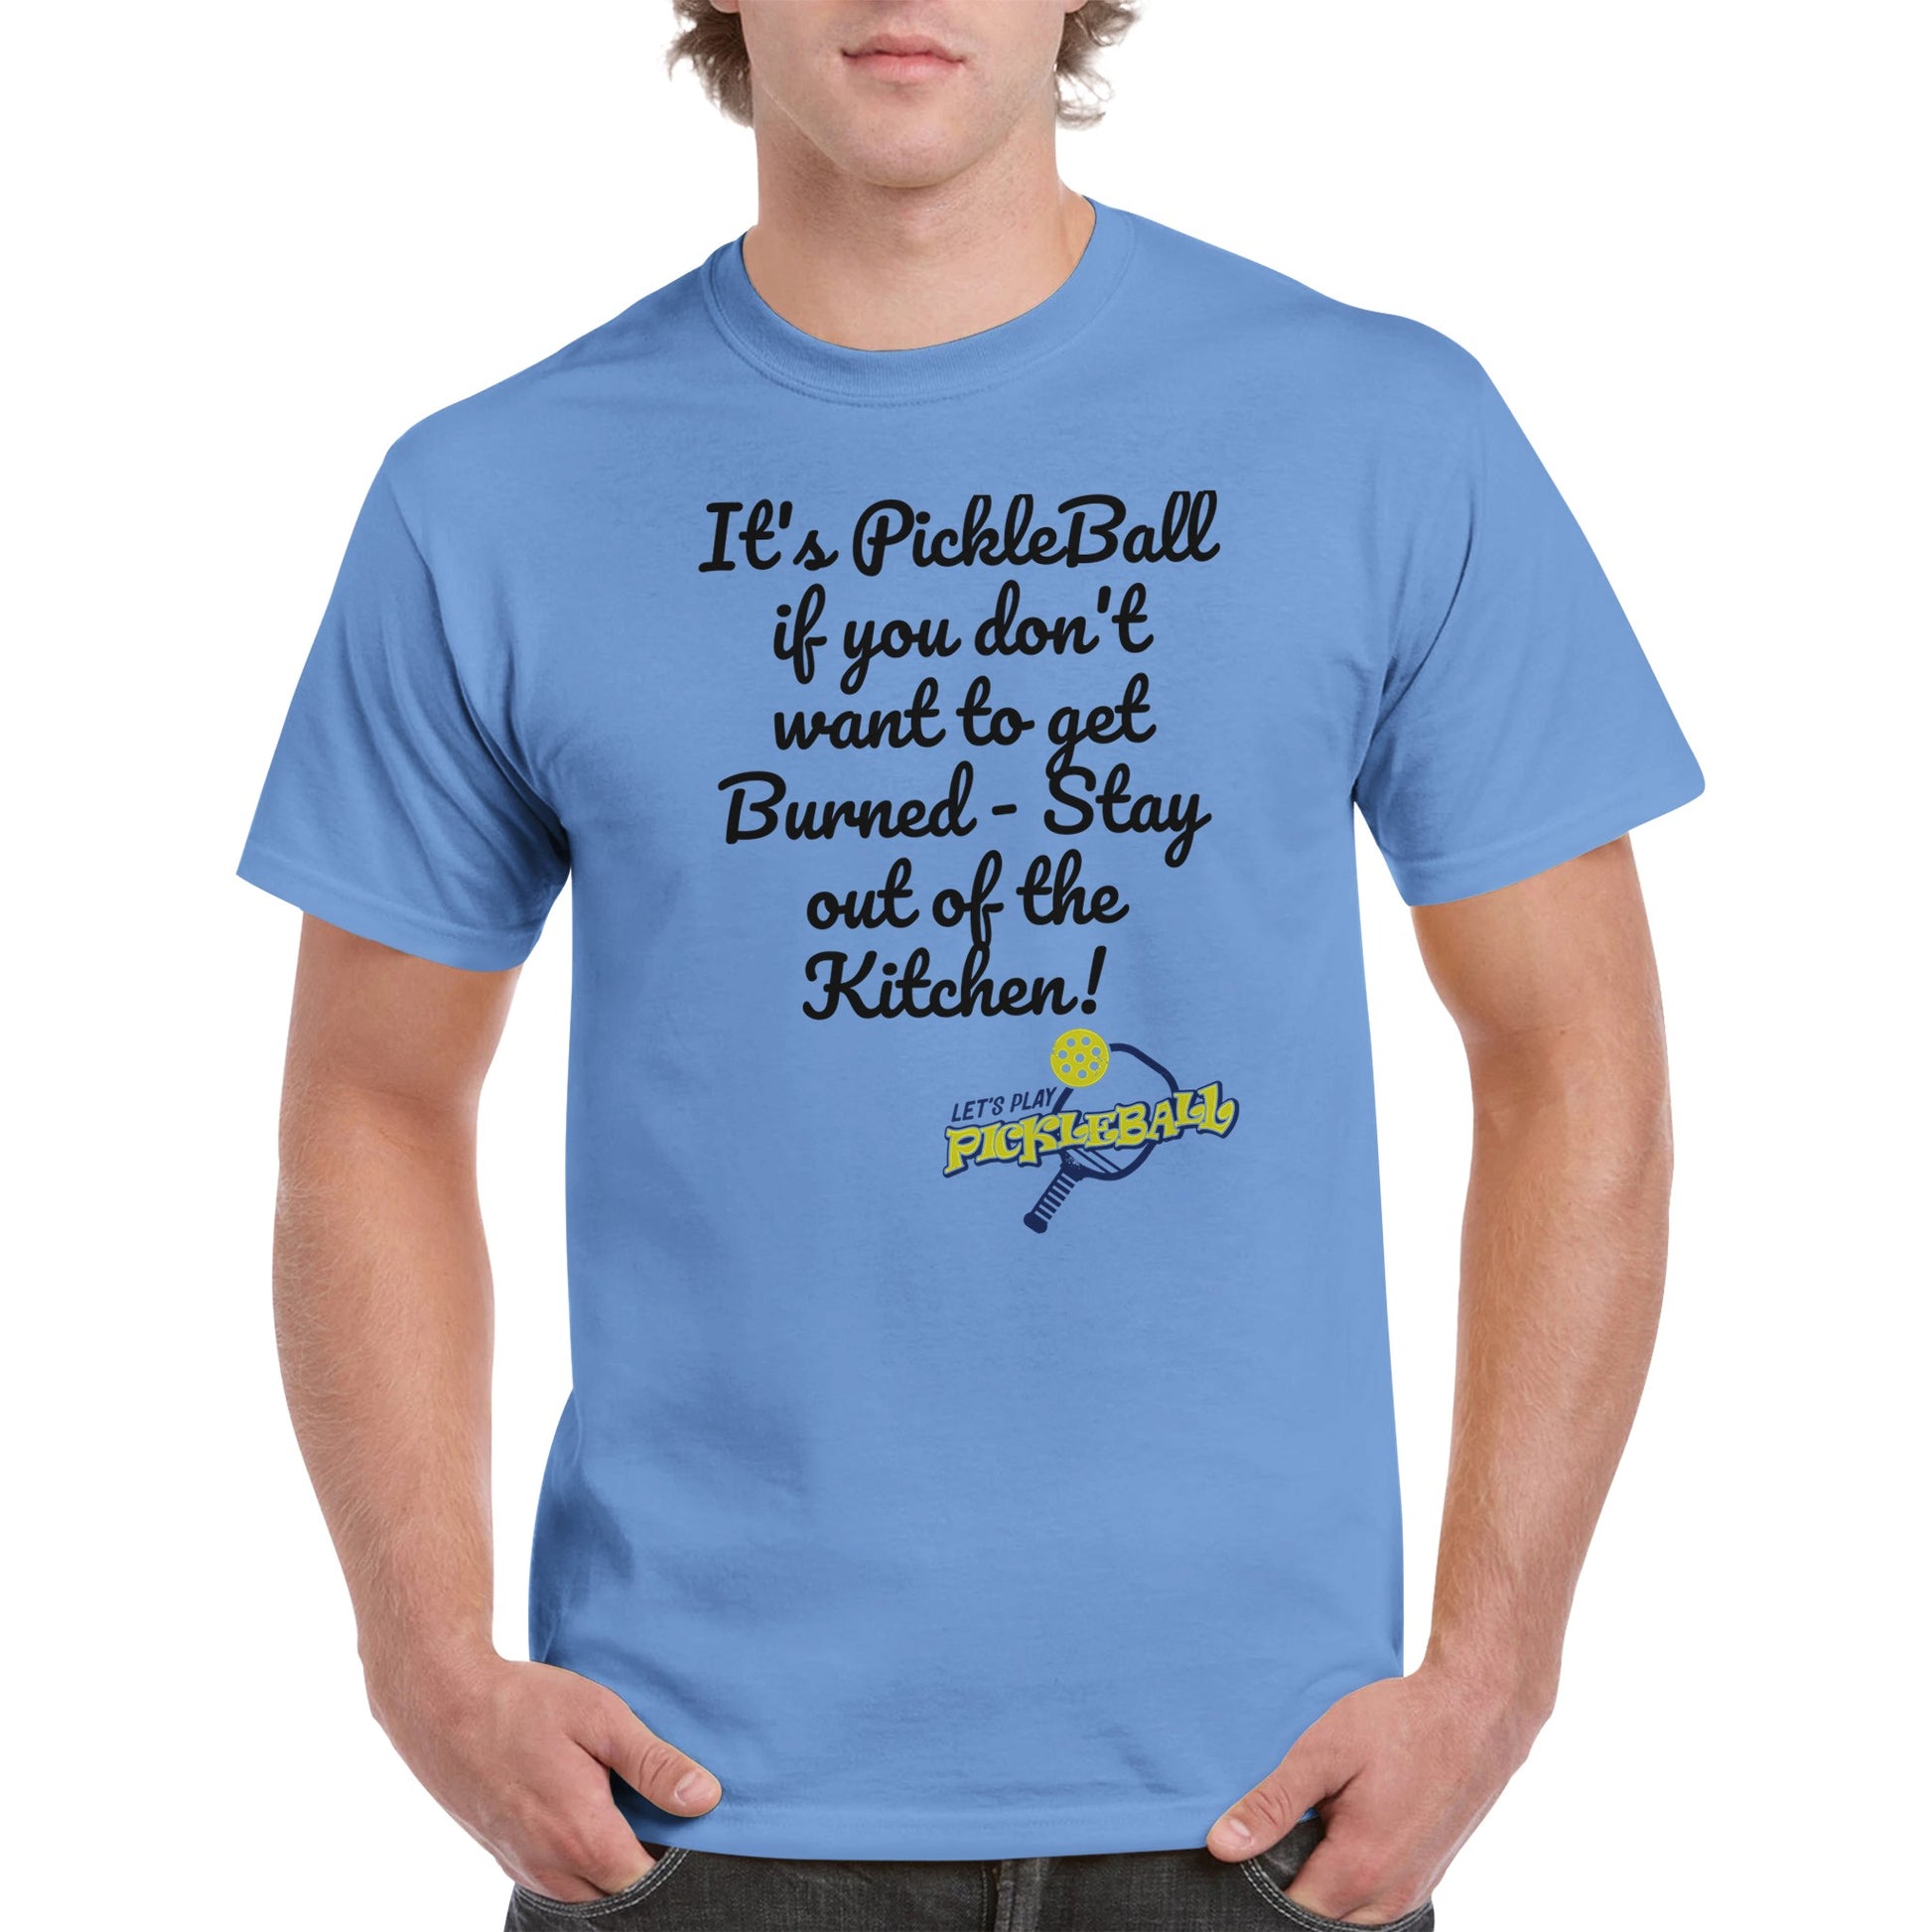 Carolina Blue comfortable Unisex Crewneck heavyweight cotton t-shirt with funny saying It’s PickleBall if you don’t want to get Burned – Stay out of the Kitchen! and Let’s Play Pickleball logo on the front from WhatYa Say Apparel worn by blonde-haired male front view.